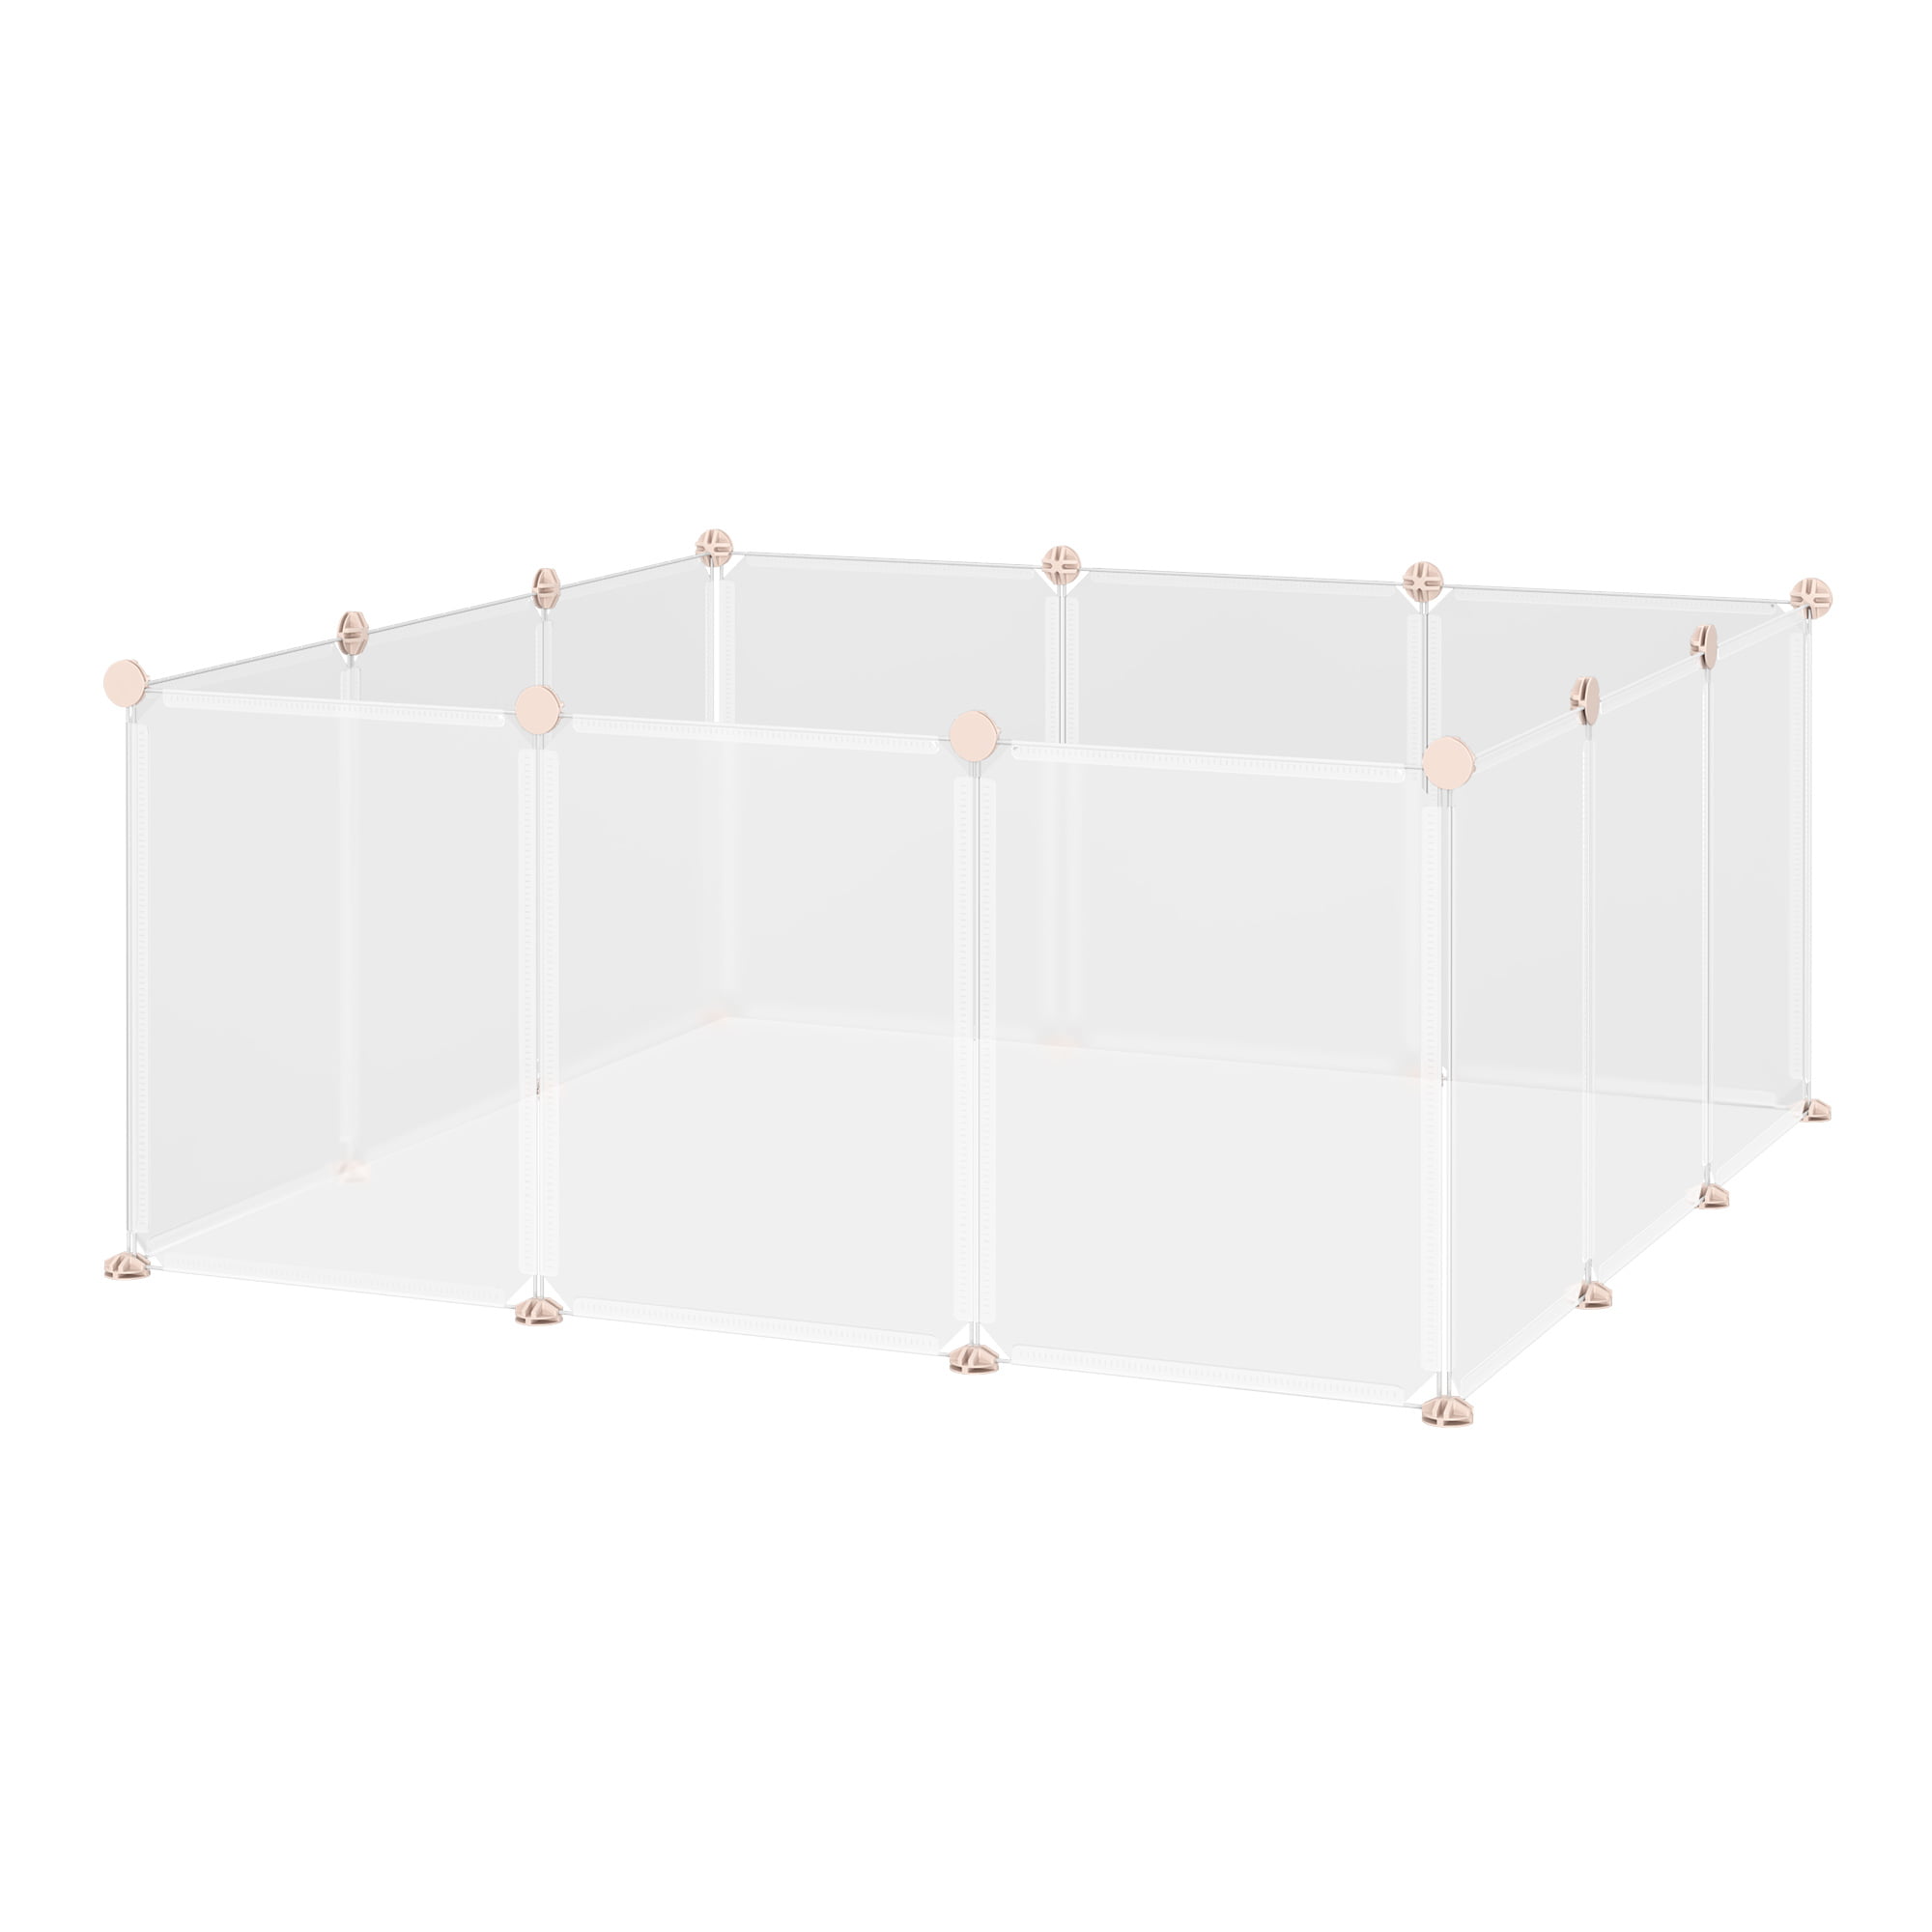 12-panel Translucent White Rackaphile Plastic Pet Playpen Portable Pet Fence for Small-Sized Pets Puppy Kitten Rabbit Bunny Guinea Pig Enclosure Cage Indoor & Outdoor 